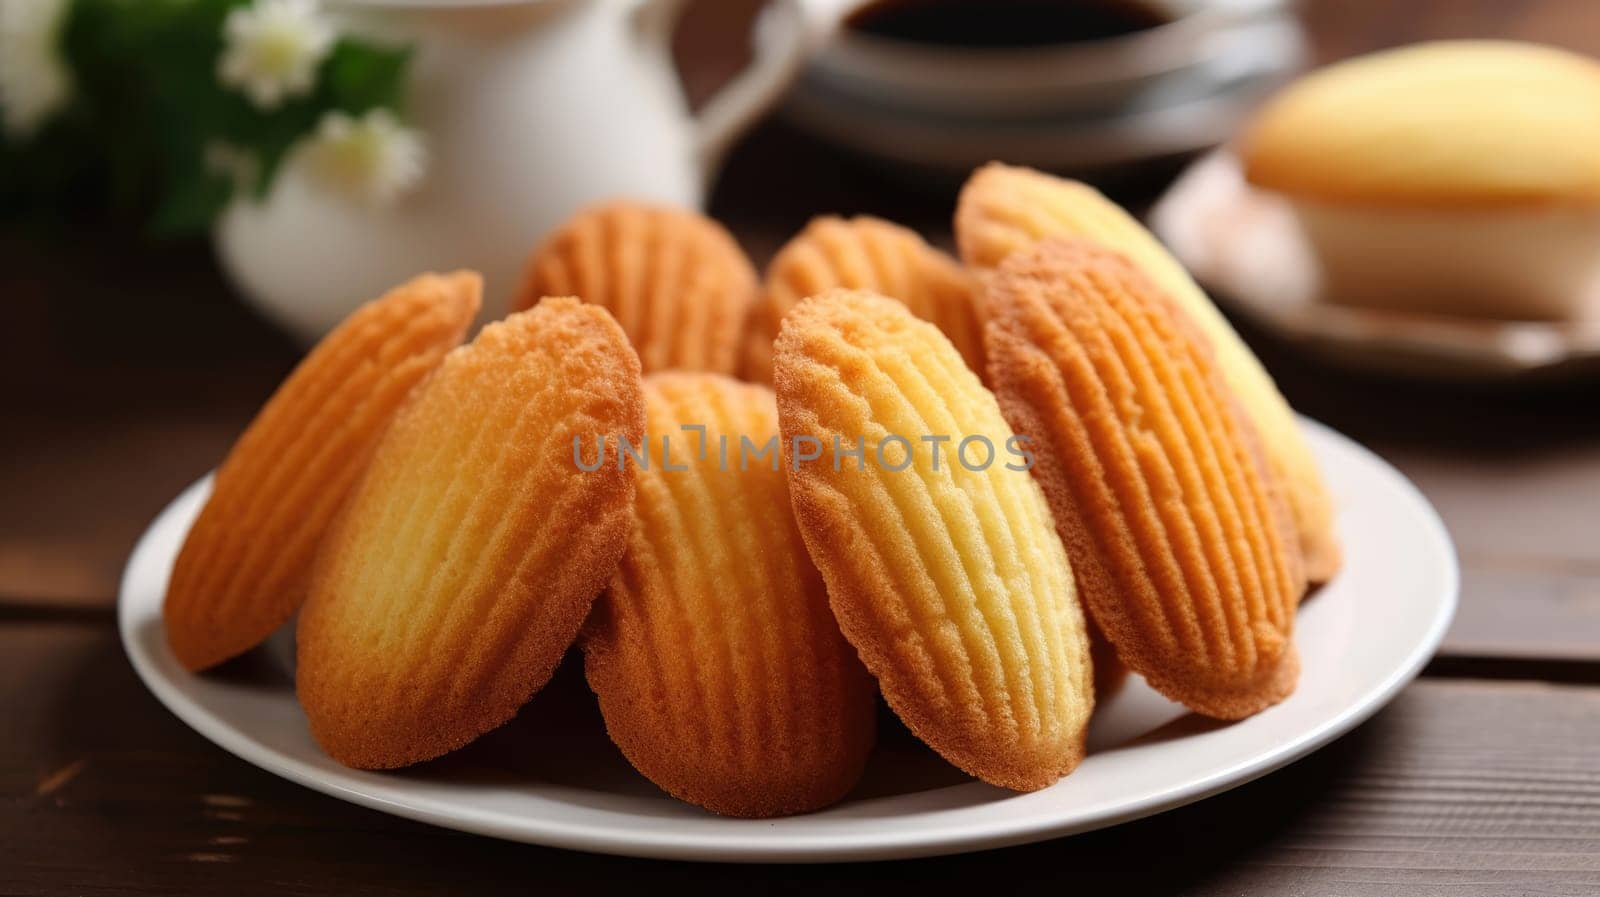 Homemade Madeleine cookies with spongy texture and shell-like shape by natali_brill